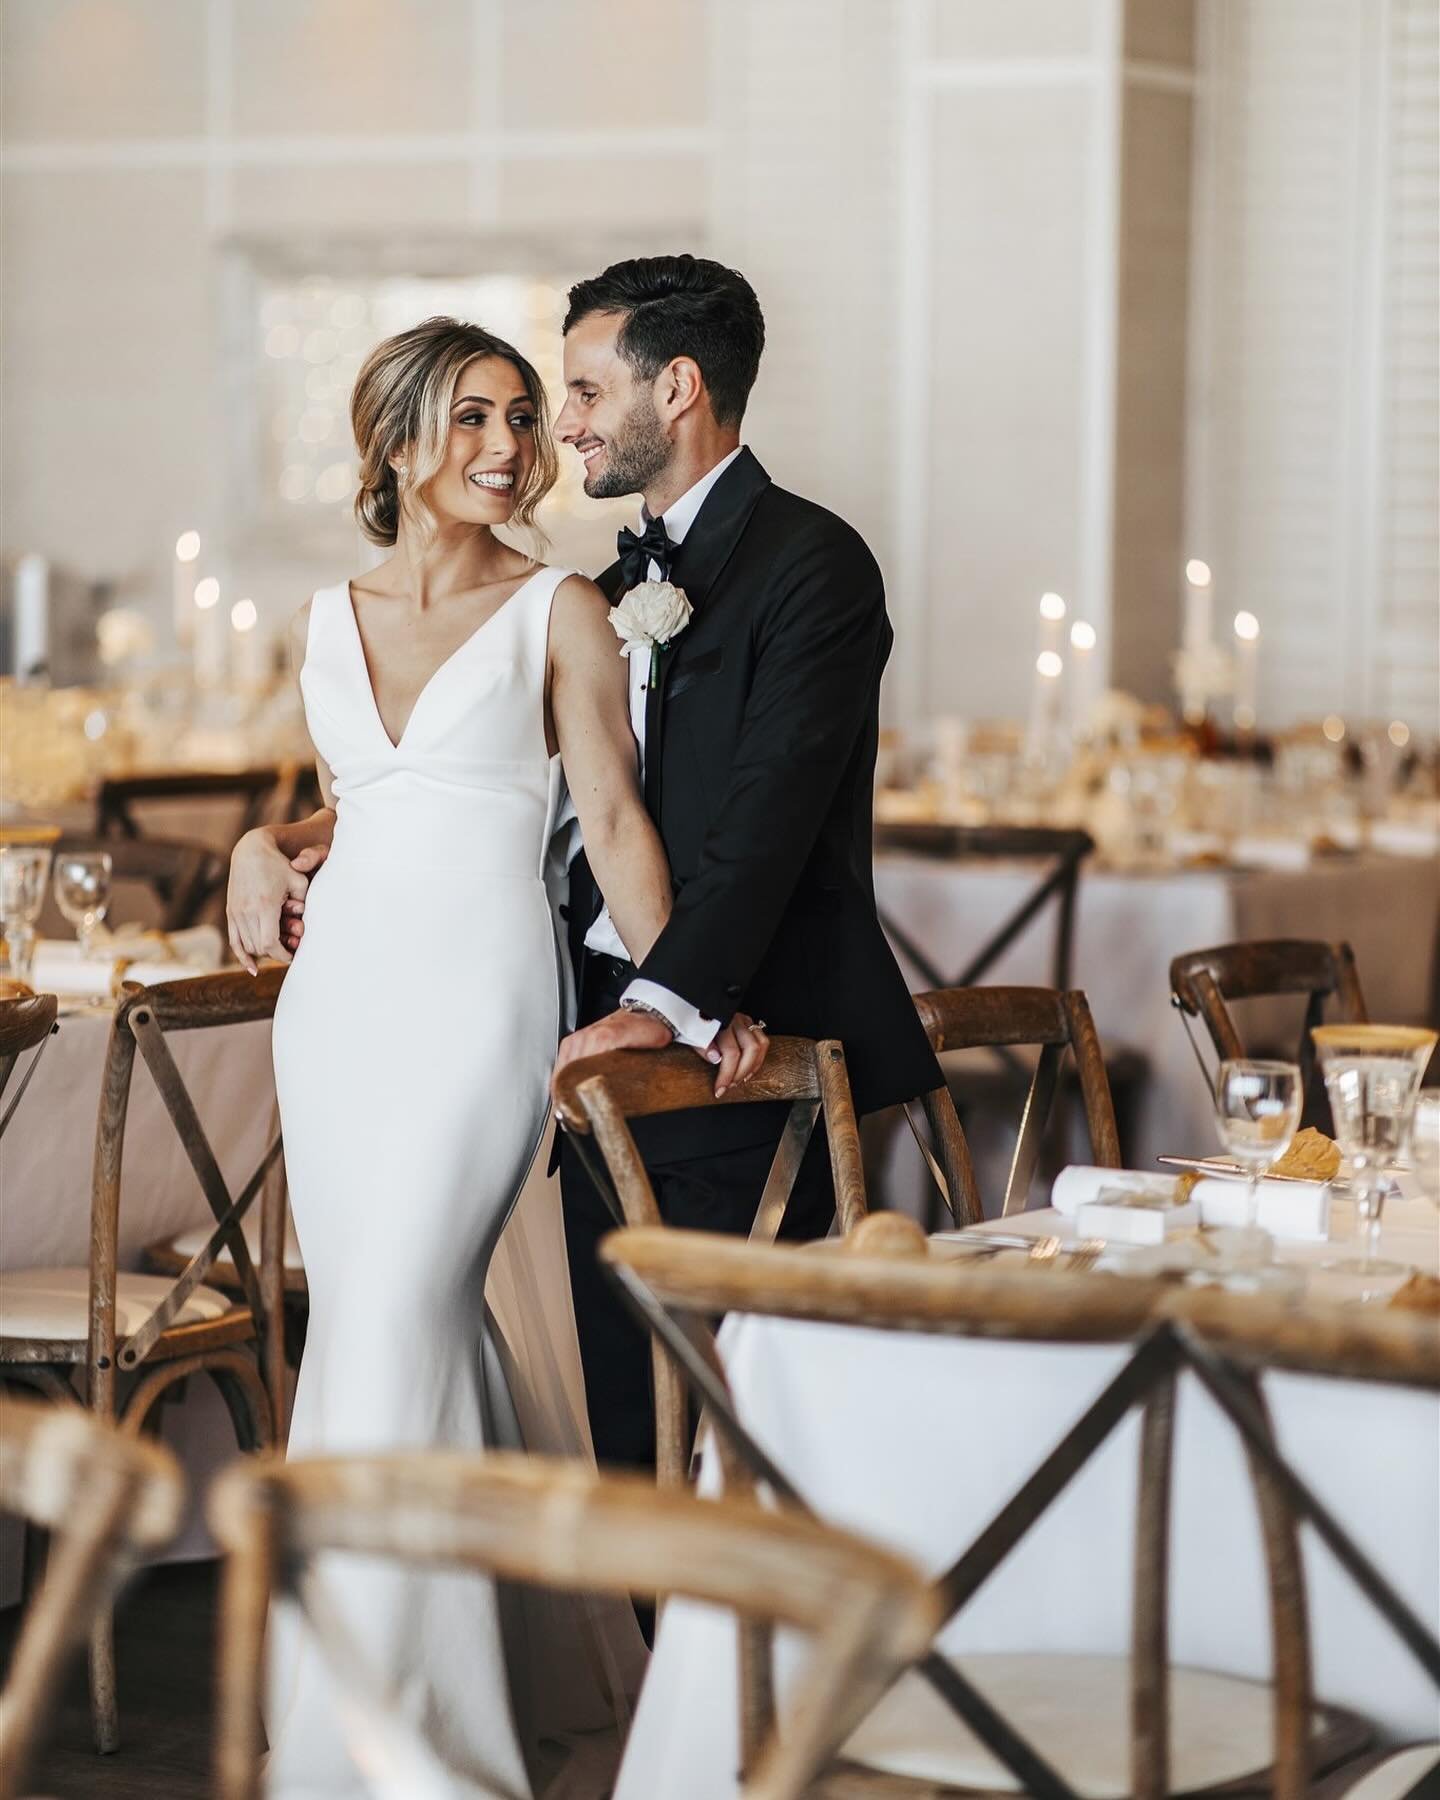 Have you noticed our HIGHLIGHTS?
We&rsquo;re building a collection of photos from some of our favourite Sydney venues, so you can see how we&rsquo;ve photographed your venue for a real wedding.

Our latest is Zest, and in particular Alexandra and Ste